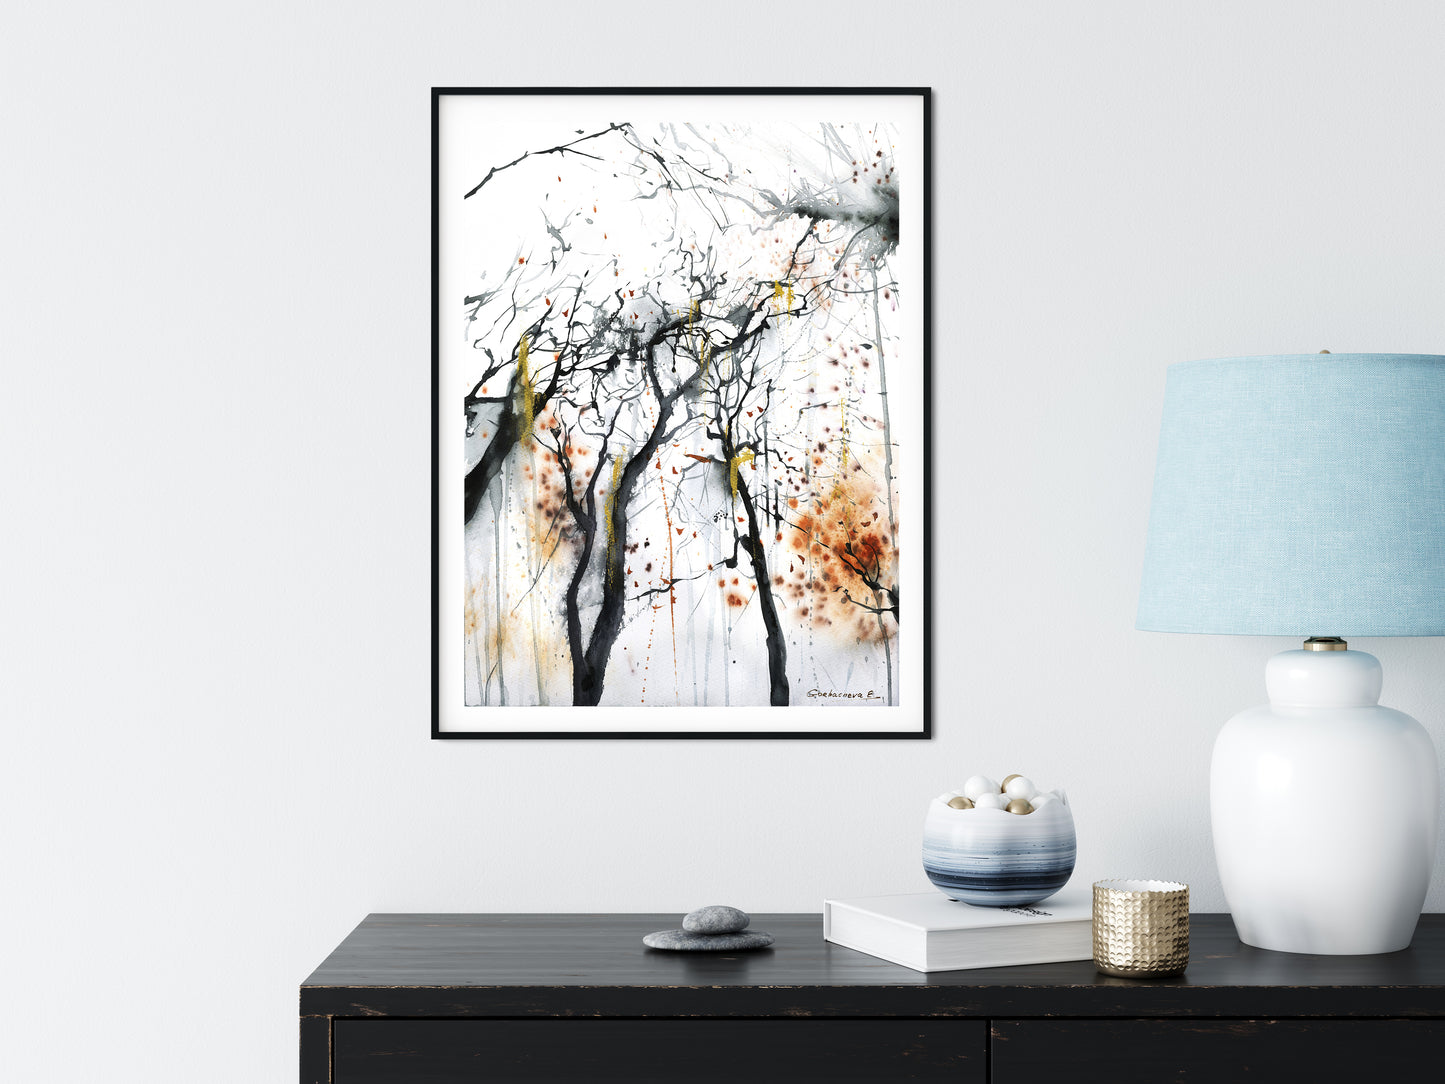 Watercolour Abstract Print, Autumn Dark Forest, Fall Prints, Sienna Wall Art, Landscape Painting, Scary Surreal Poster